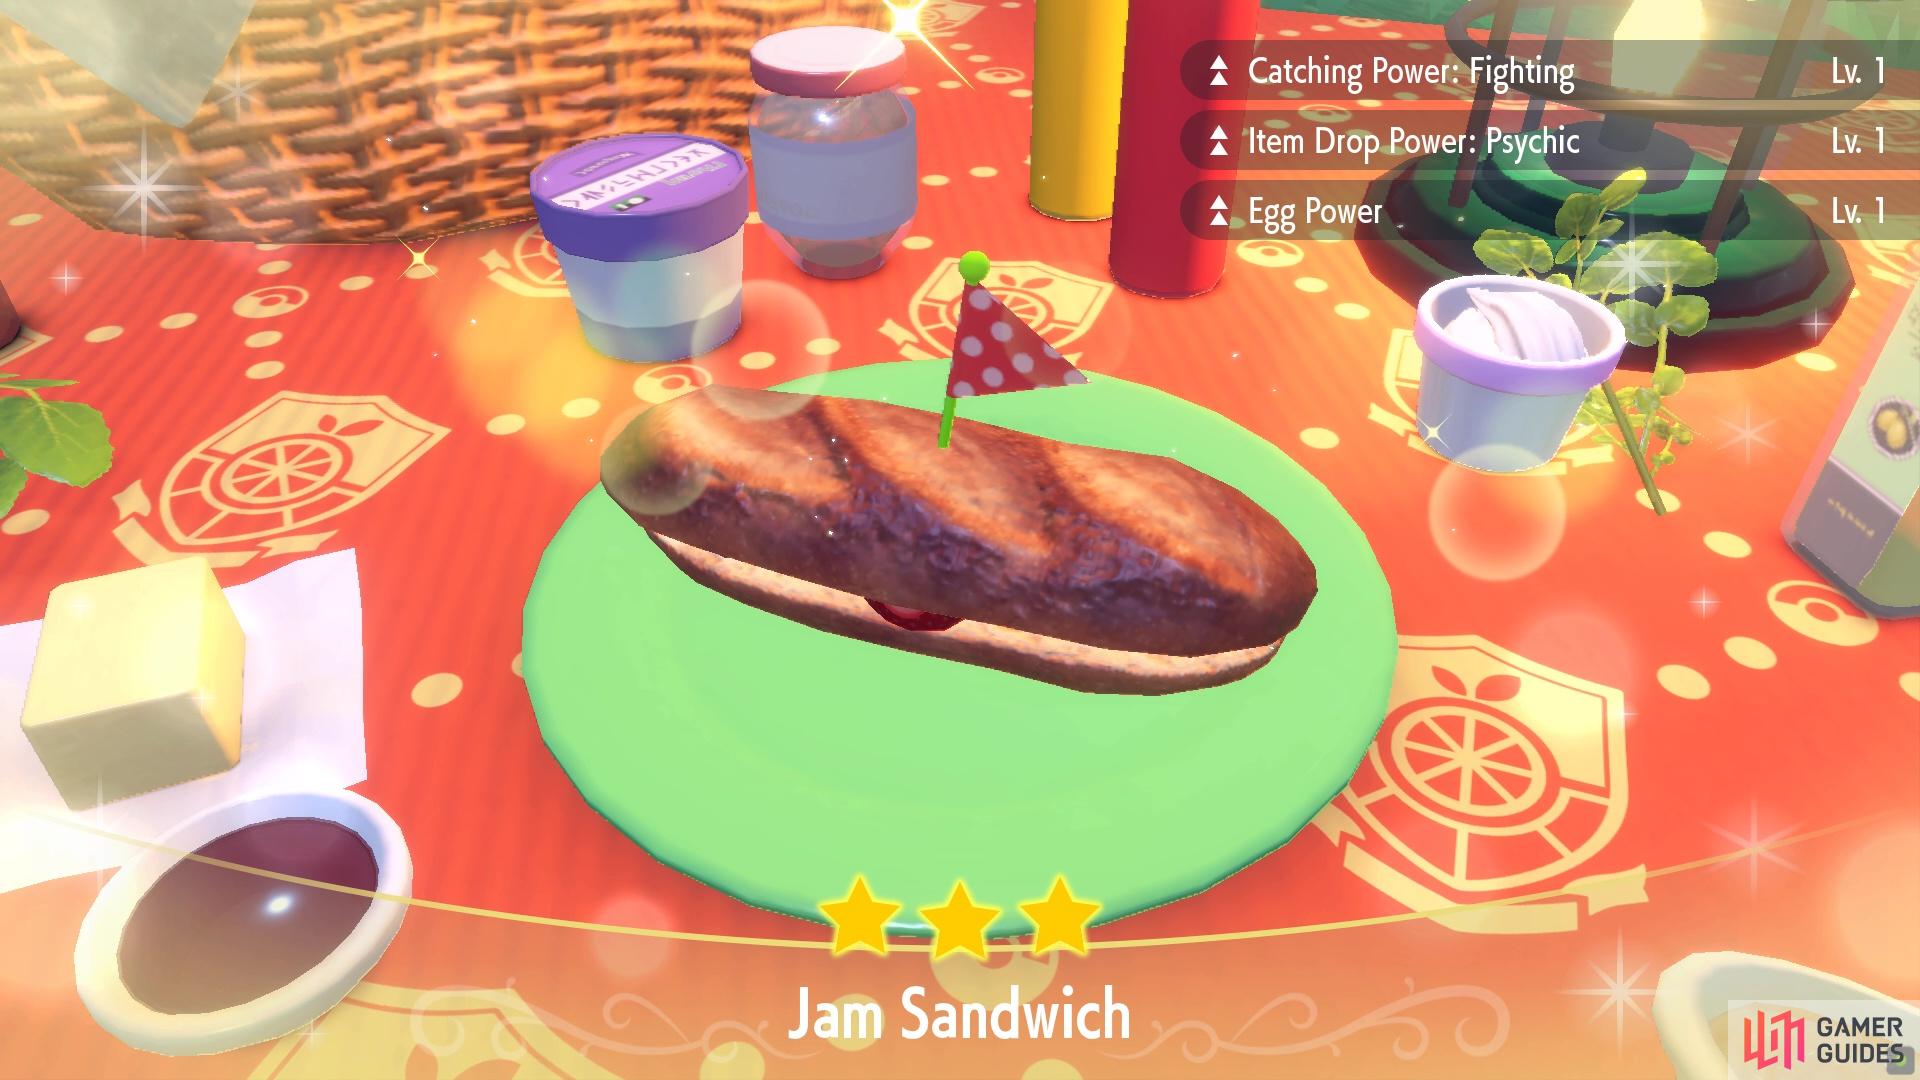 Fruit Sandwiches give you Egg Power, increasing your breeding rates.